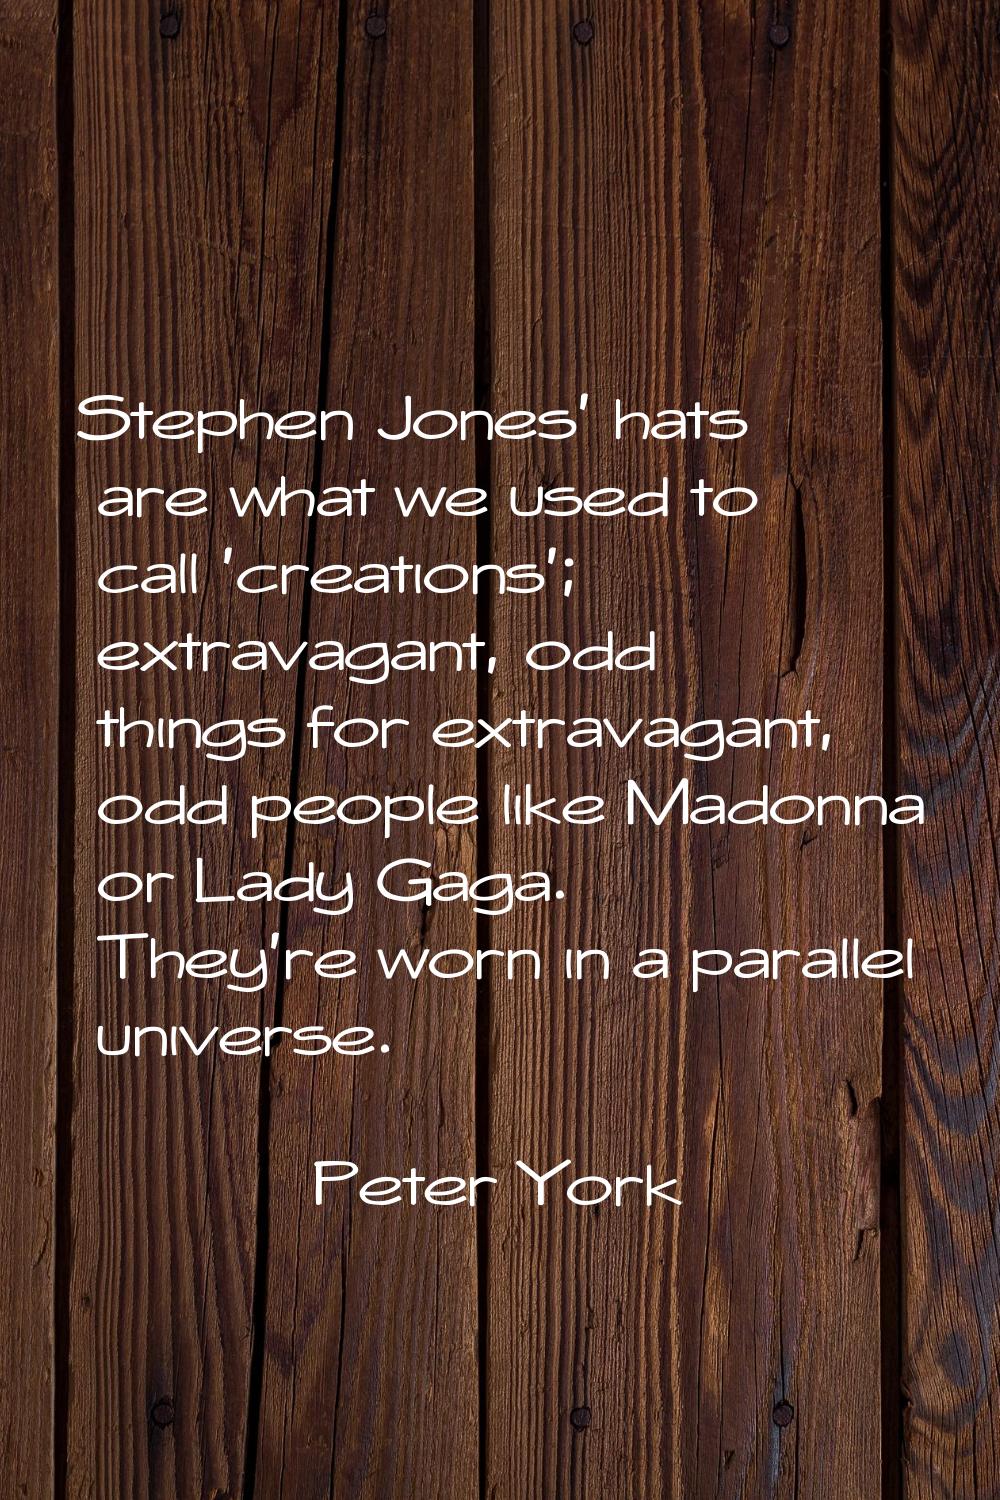 Stephen Jones' hats are what we used to call 'creations'; extravagant, odd things for extravagant, 